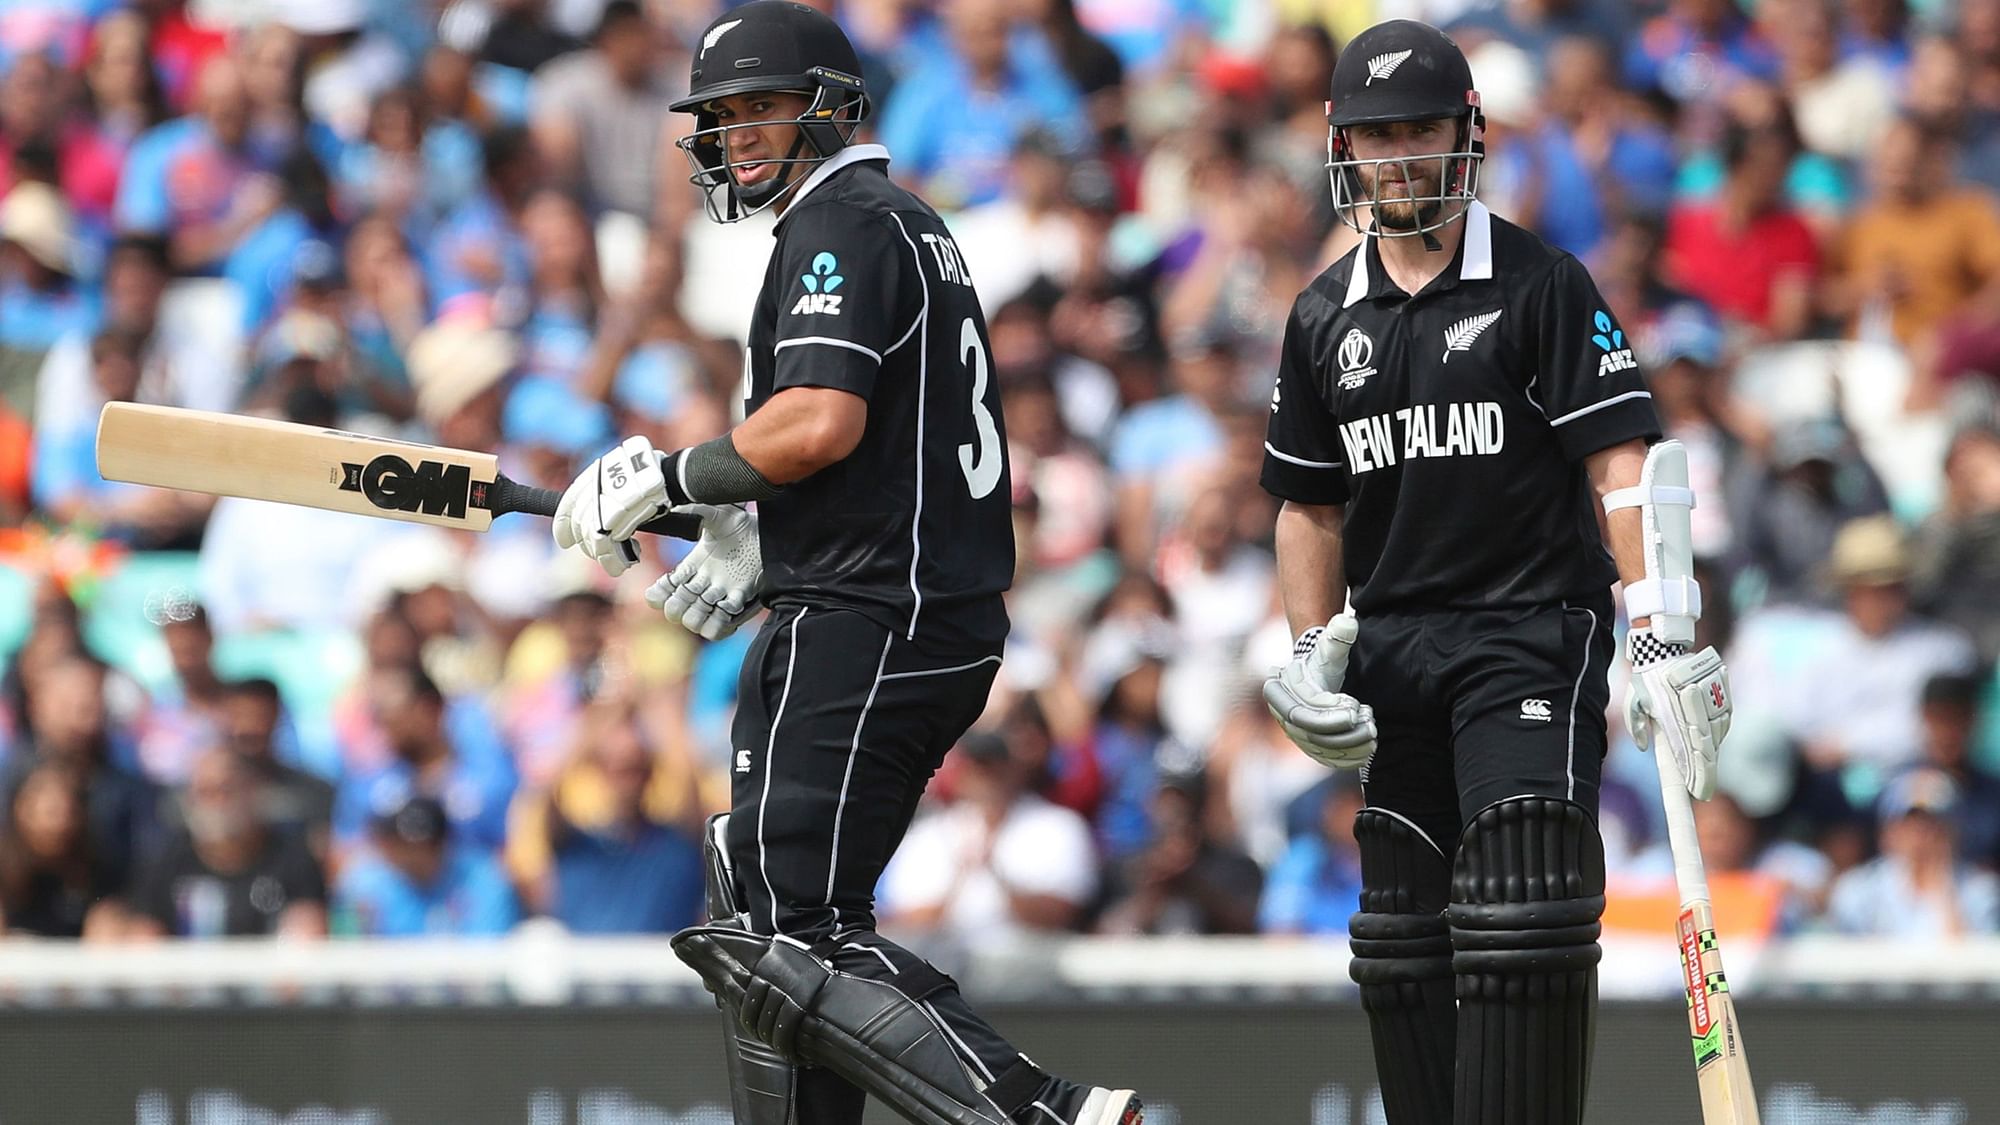 New Zealand captain Kane Williamson, right, watches as teammate Ross Taylor celebrates scoring fifty runs during the Cricket World Cup